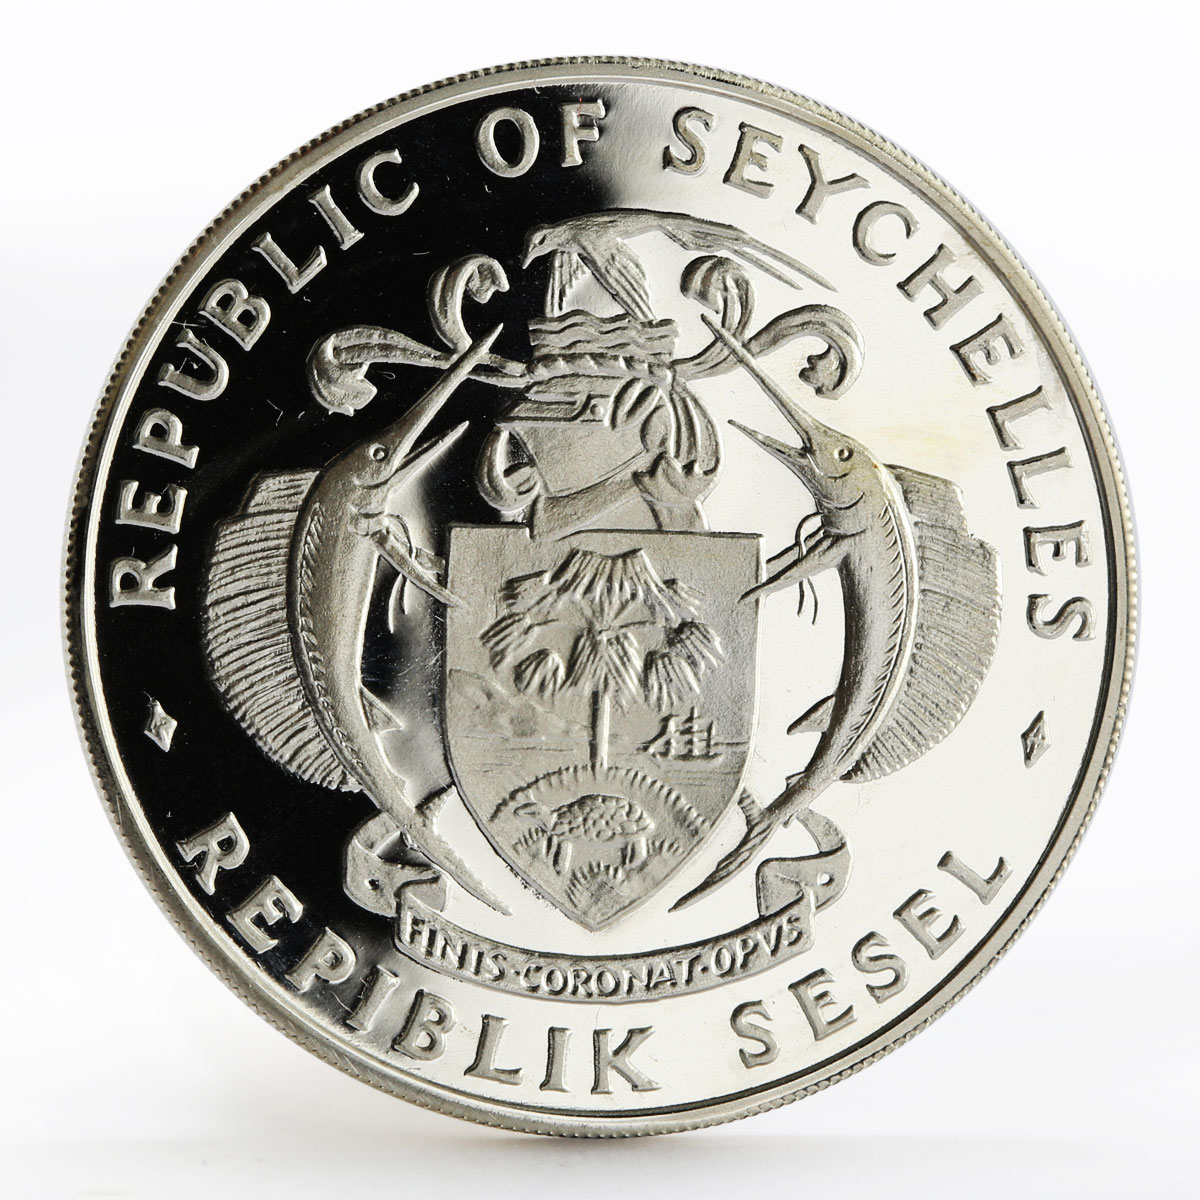 Seychelles 100 rupees 10th Anniversary of Liberation proof silver coin 1987